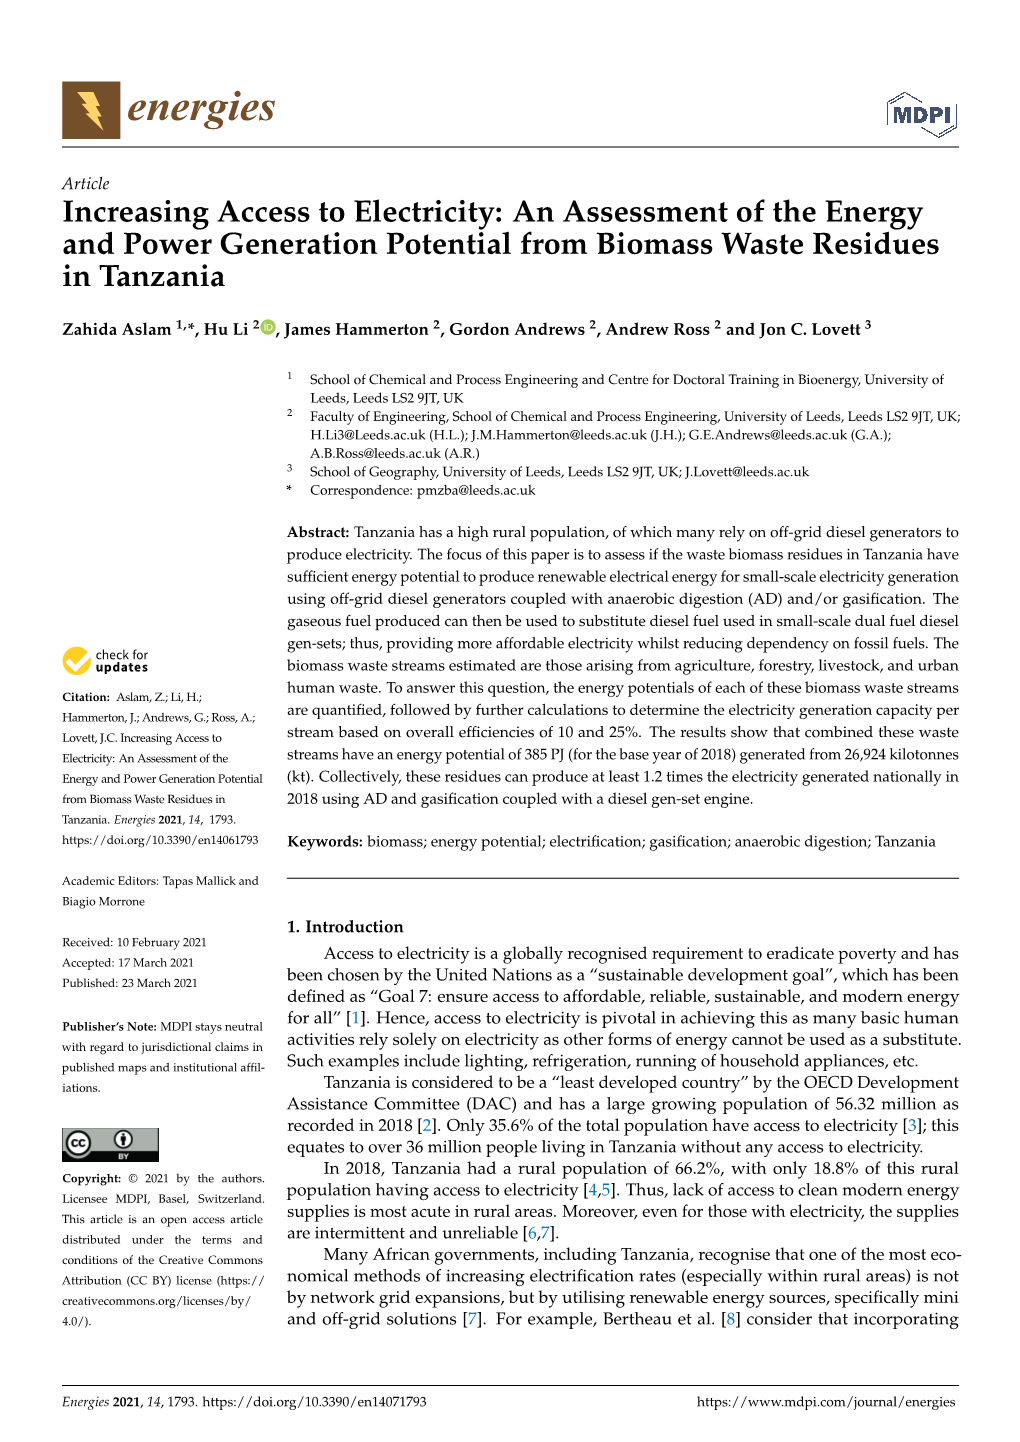 Increasing Access to Electricity: an Assessment of the Energy and Power Generation Potential from Biomass Waste Residues in Tanzania